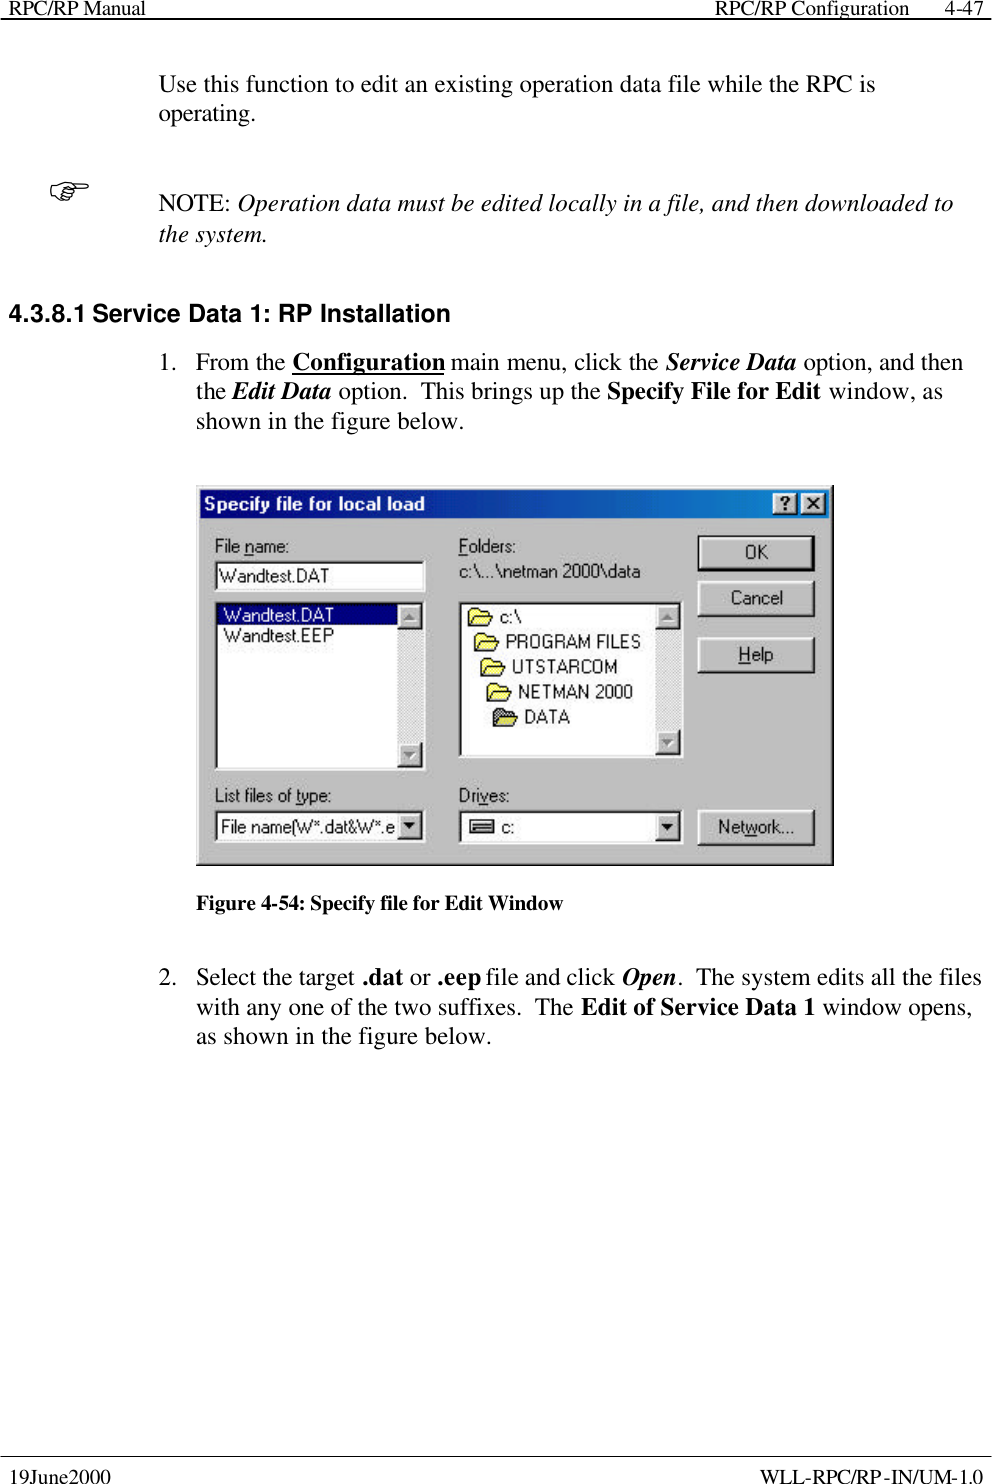 RPC/RP Manual    RPC/RP Configuration 19June2000    WLL-RPC/RP-IN/UM-1.0 4-47Use this function to edit an existing operation data file while the RPC is operating. F NOTE: Operation data must be edited locally in a file, and then downloaded to the system. 4.3.8.1 Service Data 1: RP Installation 1.  From the Configuration main menu, click the Service Data option, and then the Edit Data option.  This brings up the Specify File for Edit window, as shown in the figure below.  Figure 4-54: Specify file for Edit Window 2.  Select the target .dat or .eep file and click Open.  The system edits all the files with any one of the two suffixes.  The Edit of Service Data 1 window opens, as shown in the figure below. 